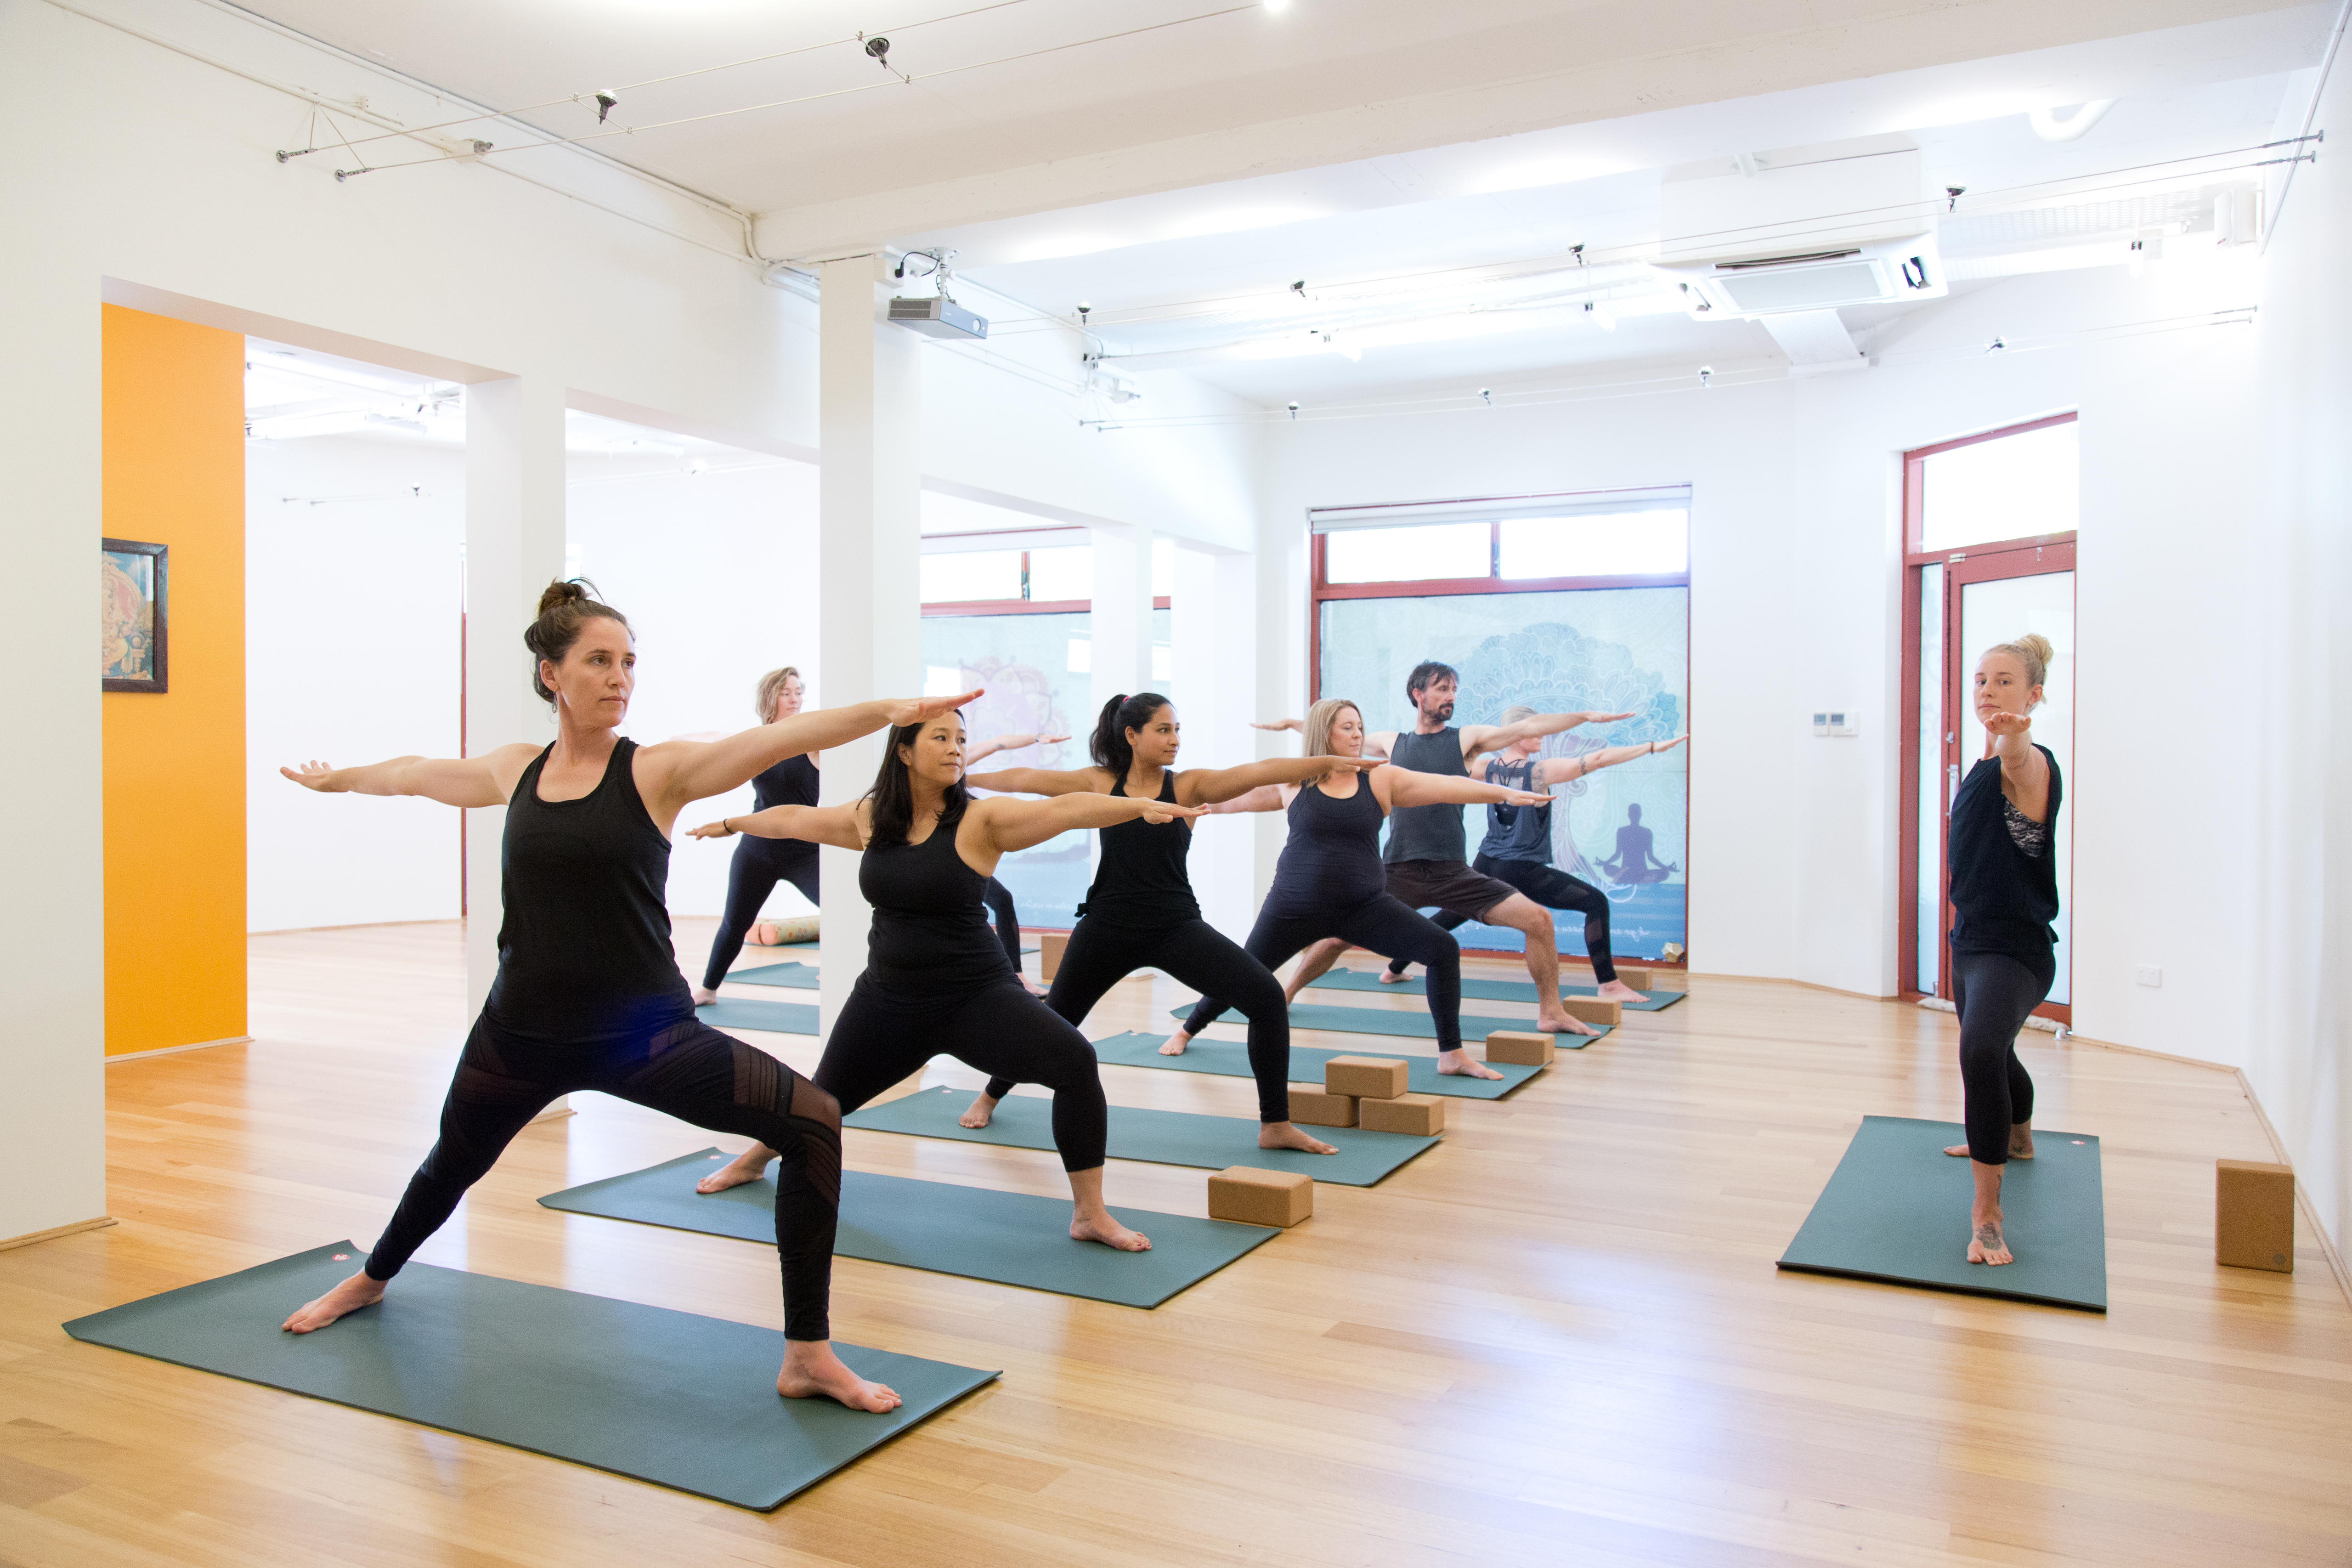 People participating in The Yoga Space's yoga class